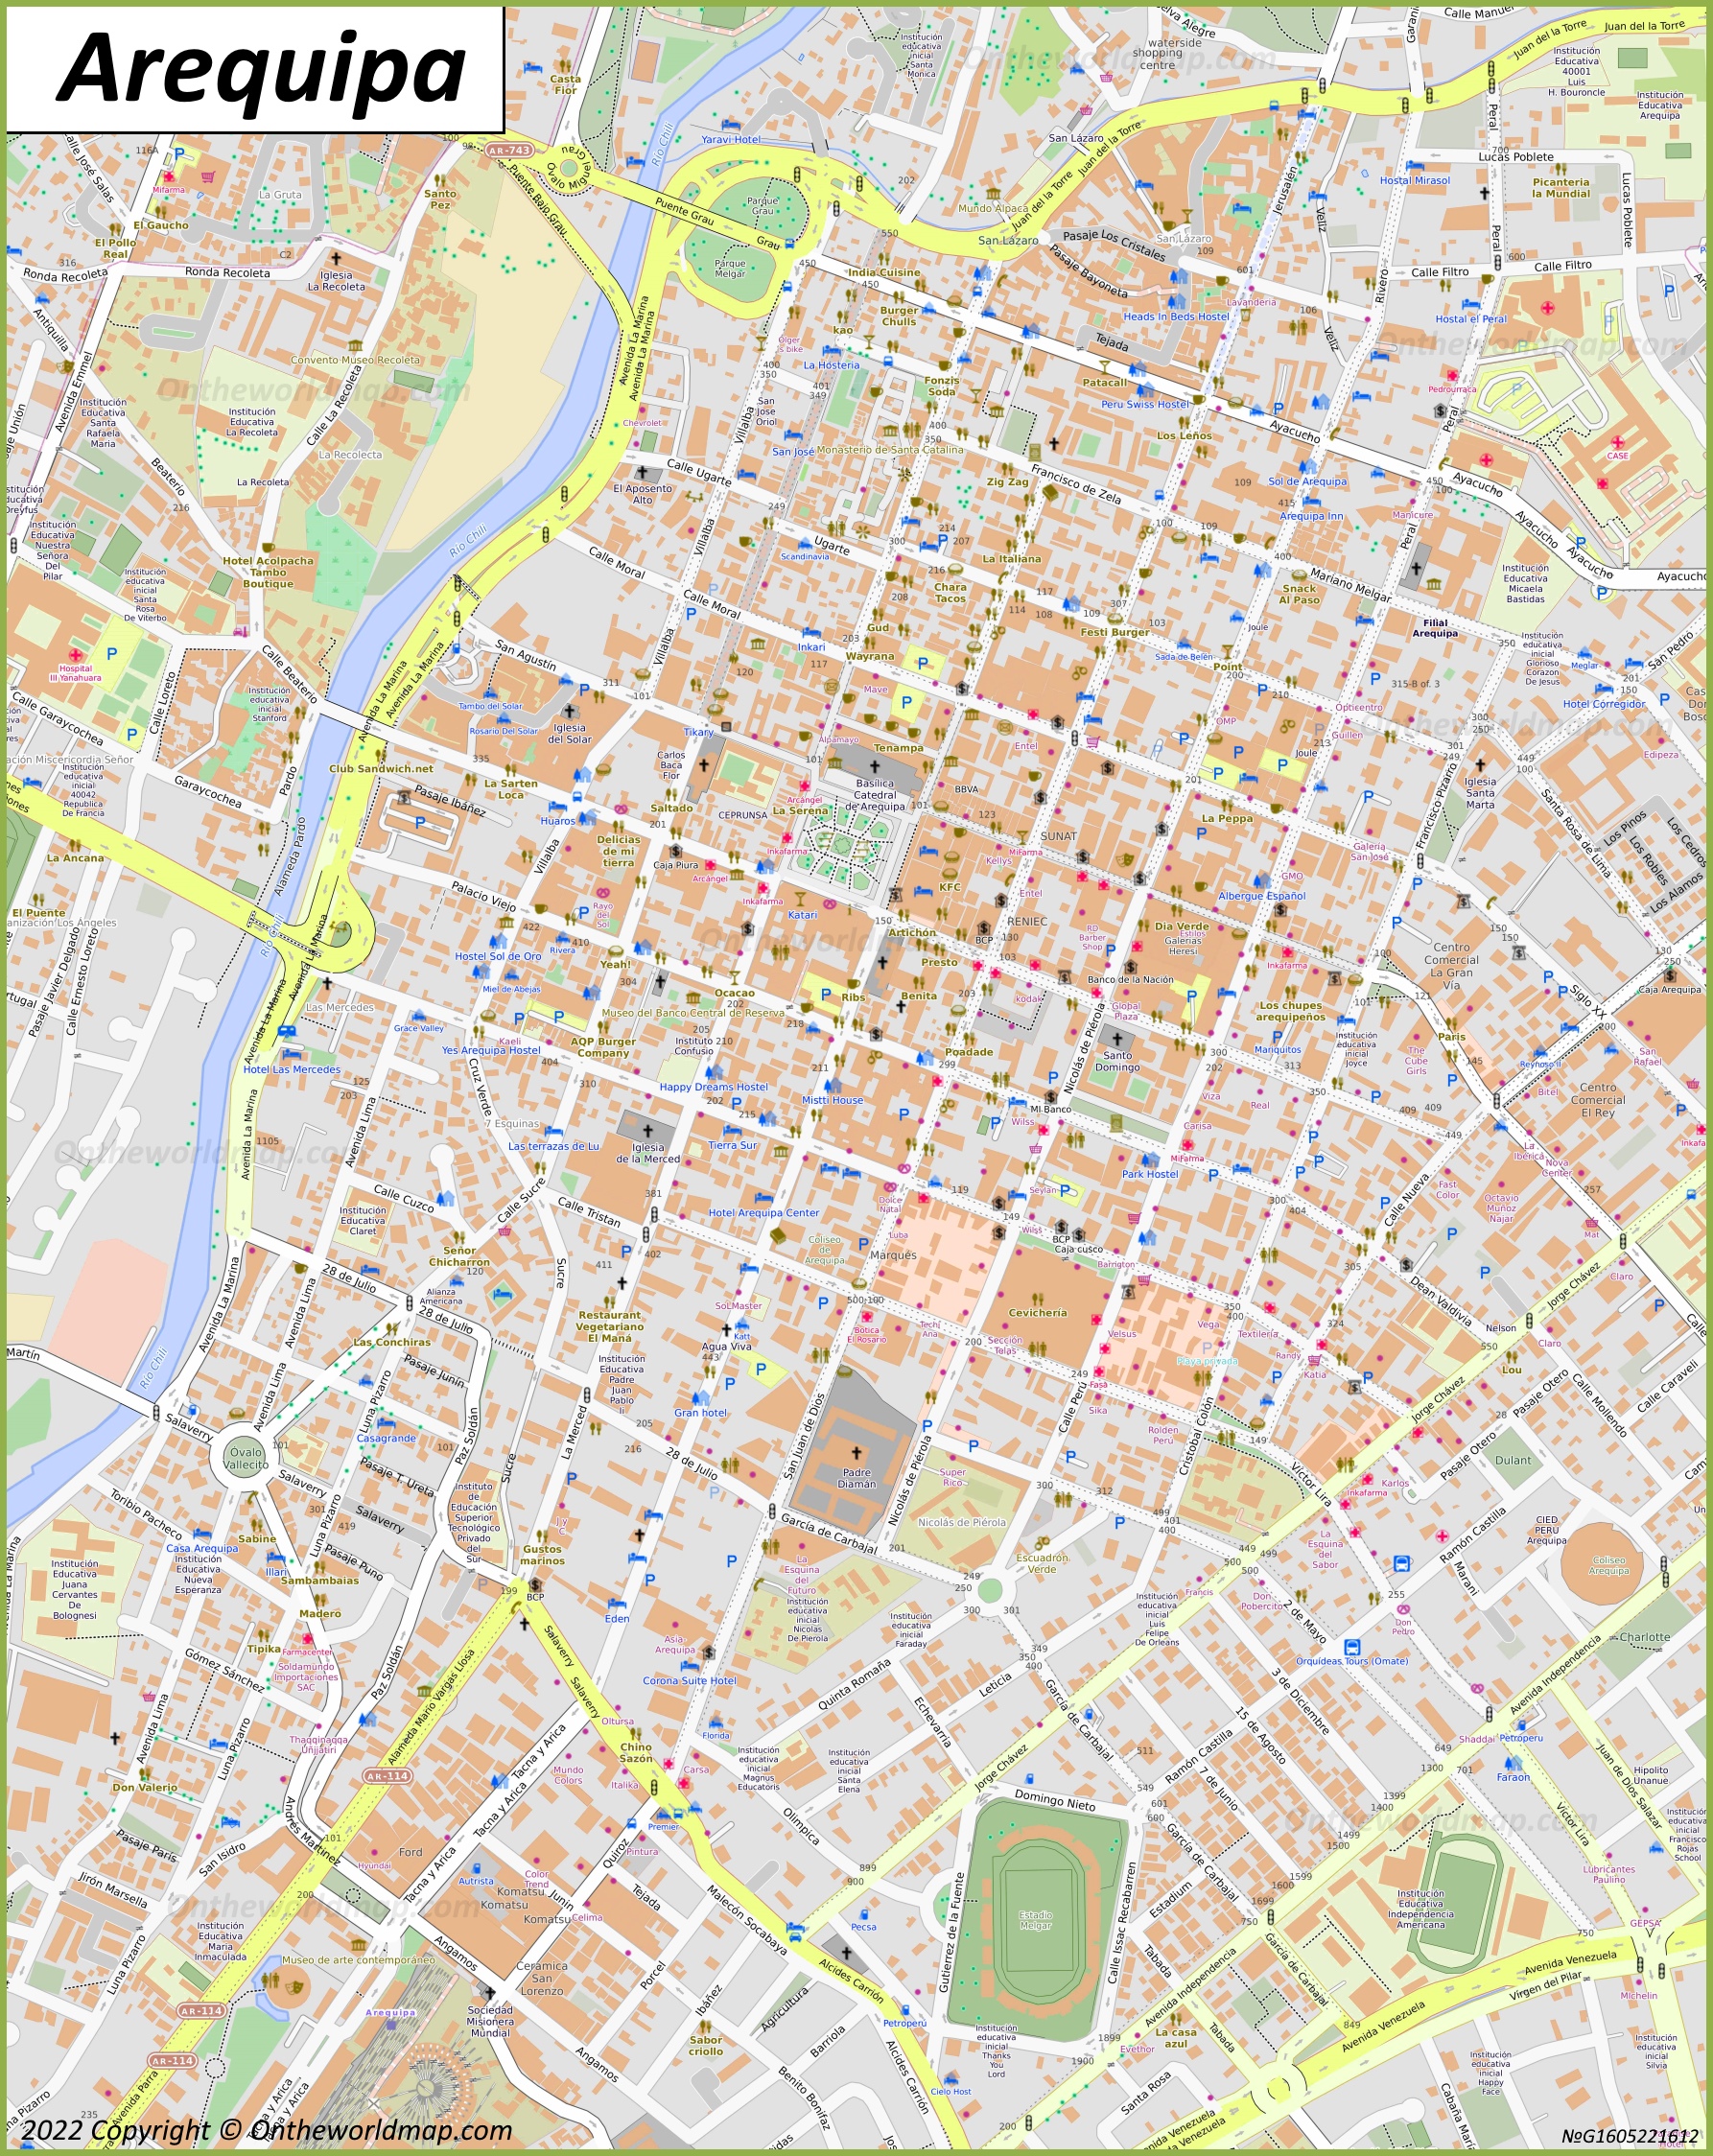 Arequipa Old Town Map